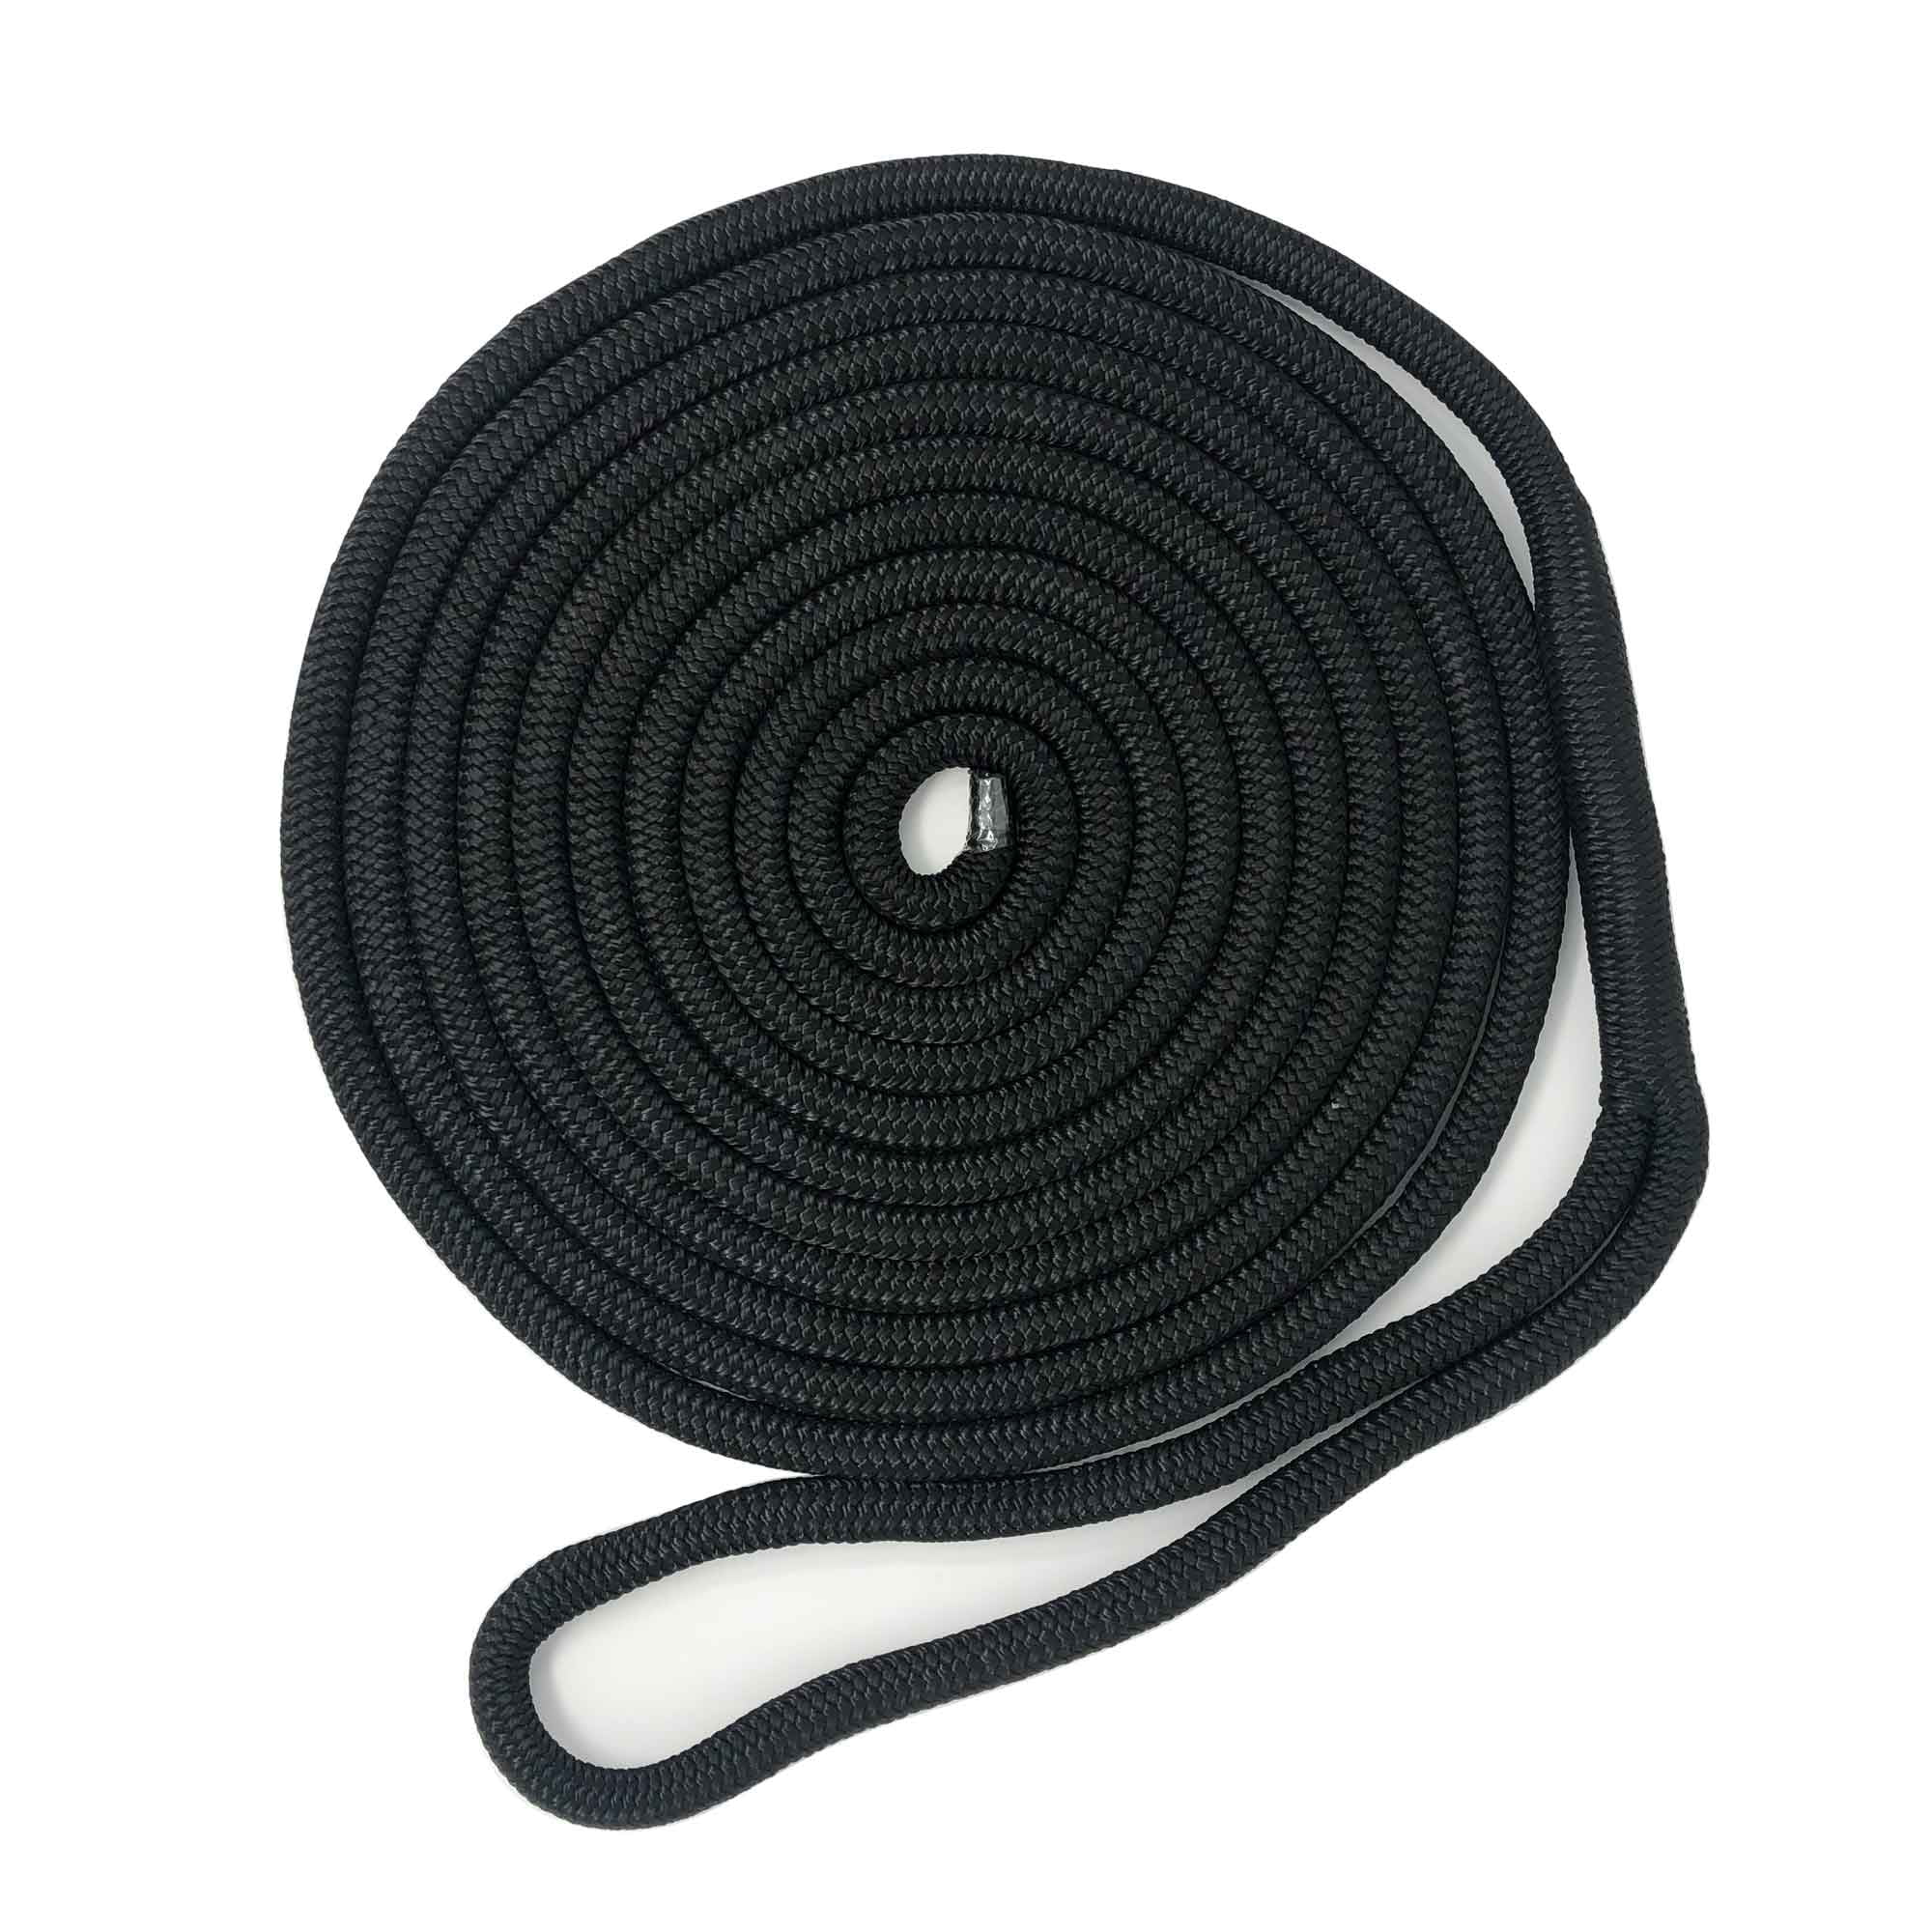 Five Oceans Marine Nylon Double Braid Dock Line 1/2 inches x 20Ft 4-Pack FO-4451-M4 Black with 12 inches Eye